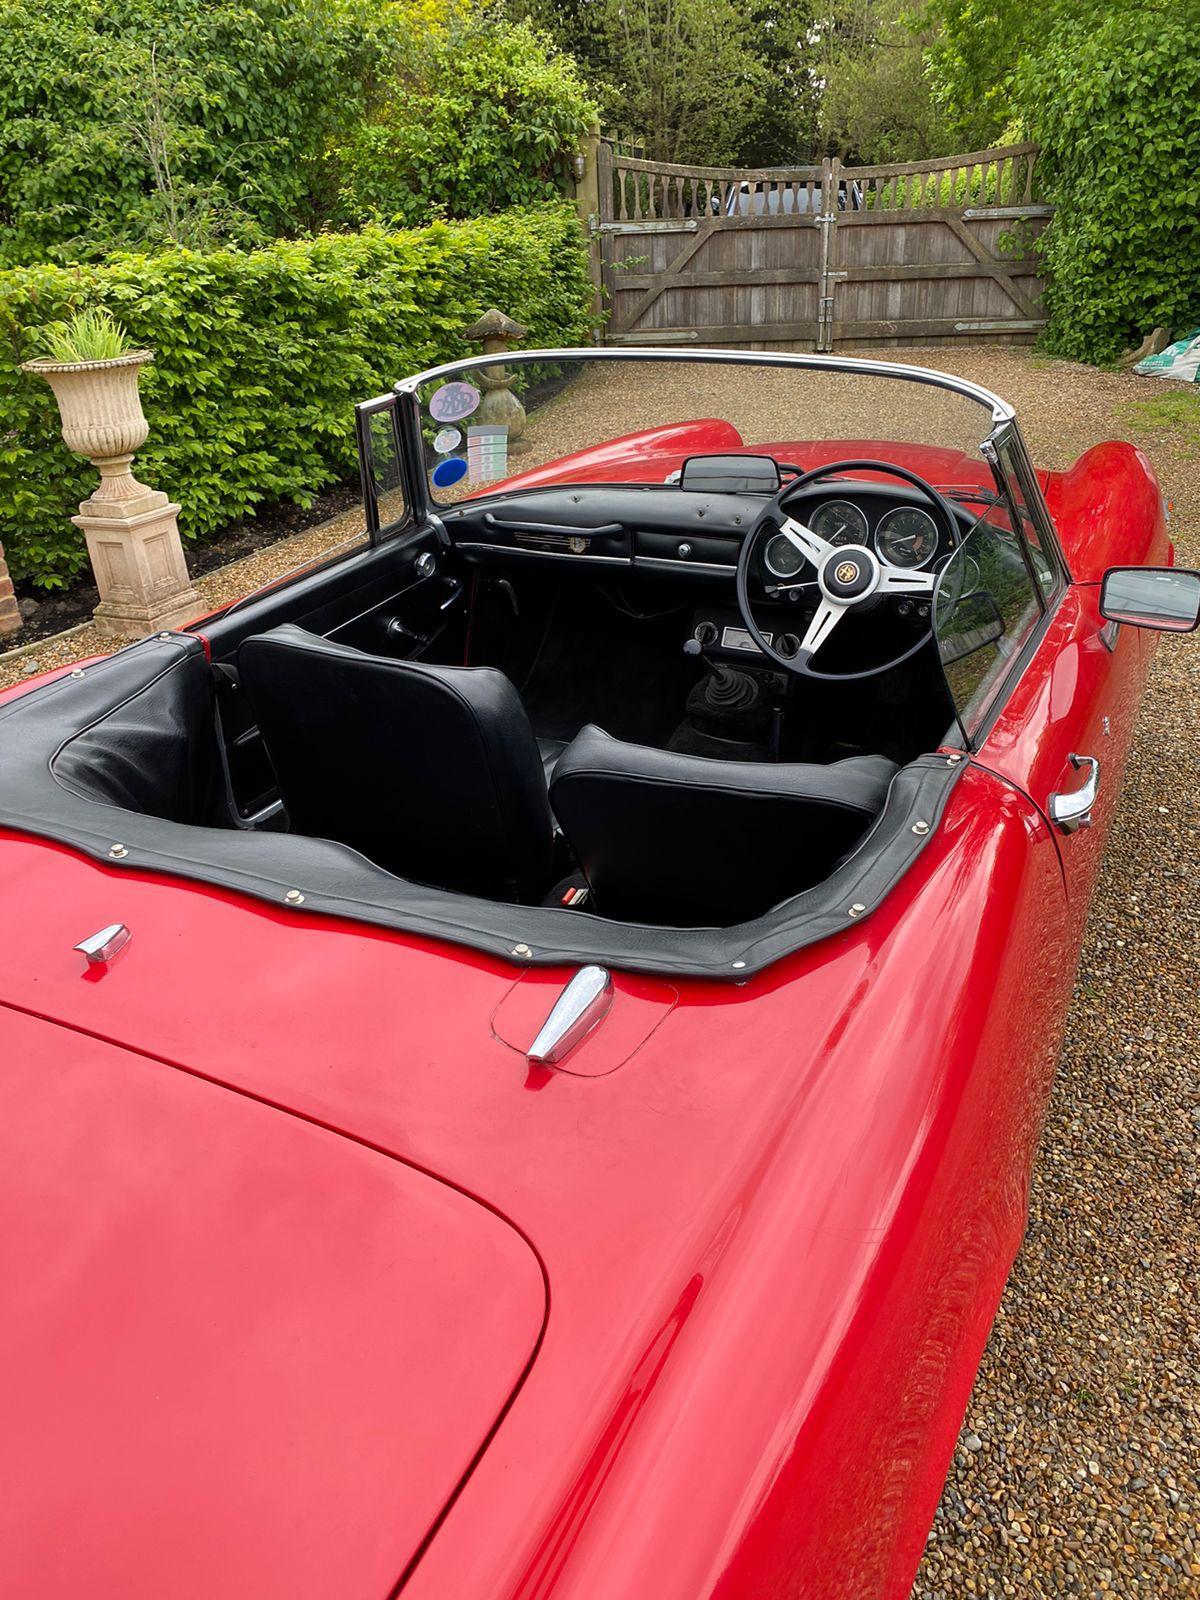 1963 Alfa Romeo 2600 Spider - First Registered 1967 - Image 9 of 25